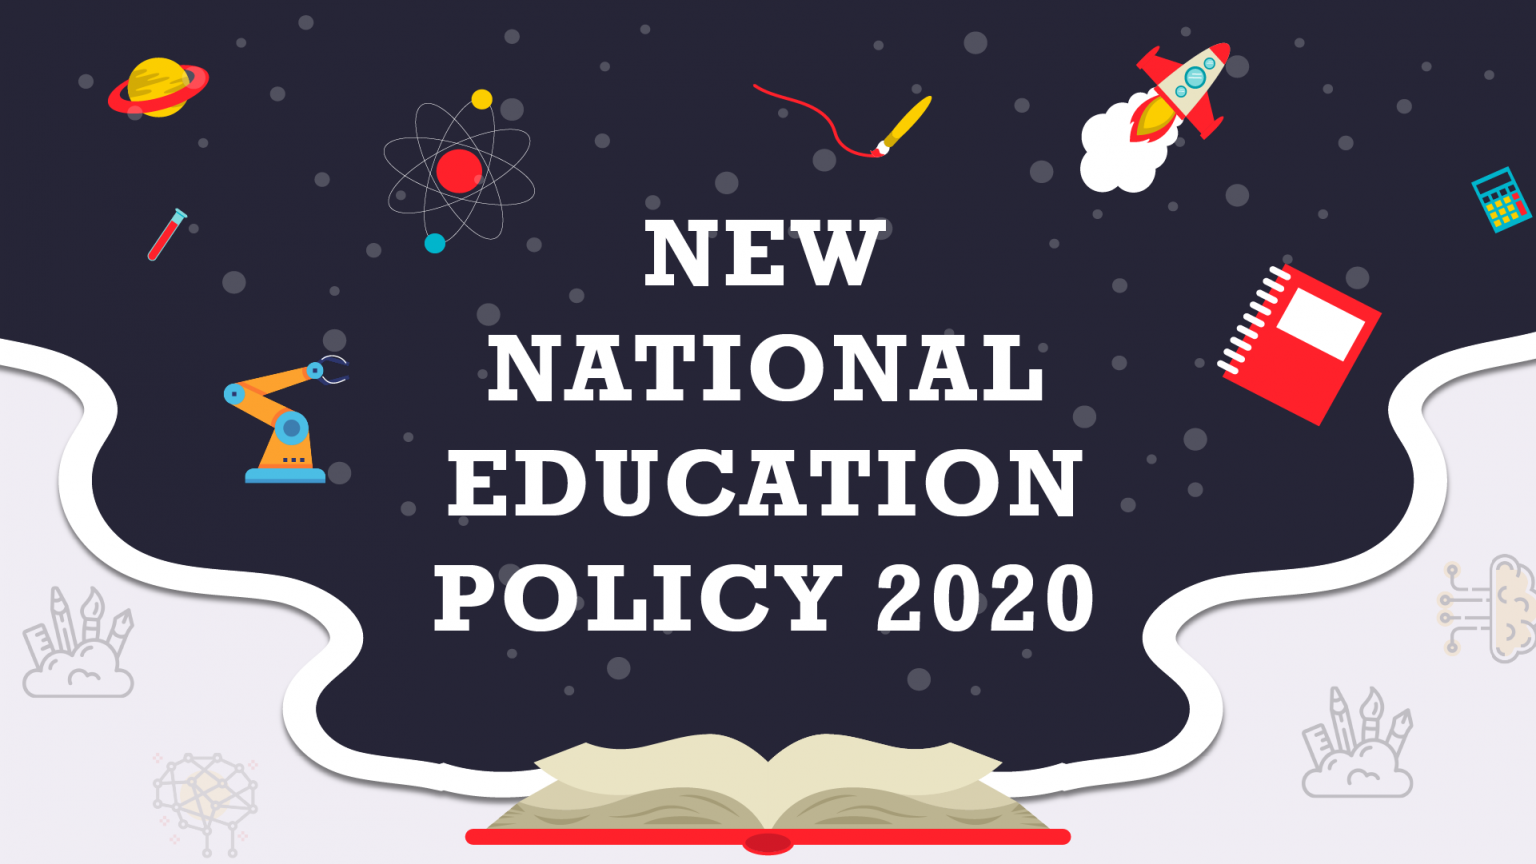 research article on new education policy 2020